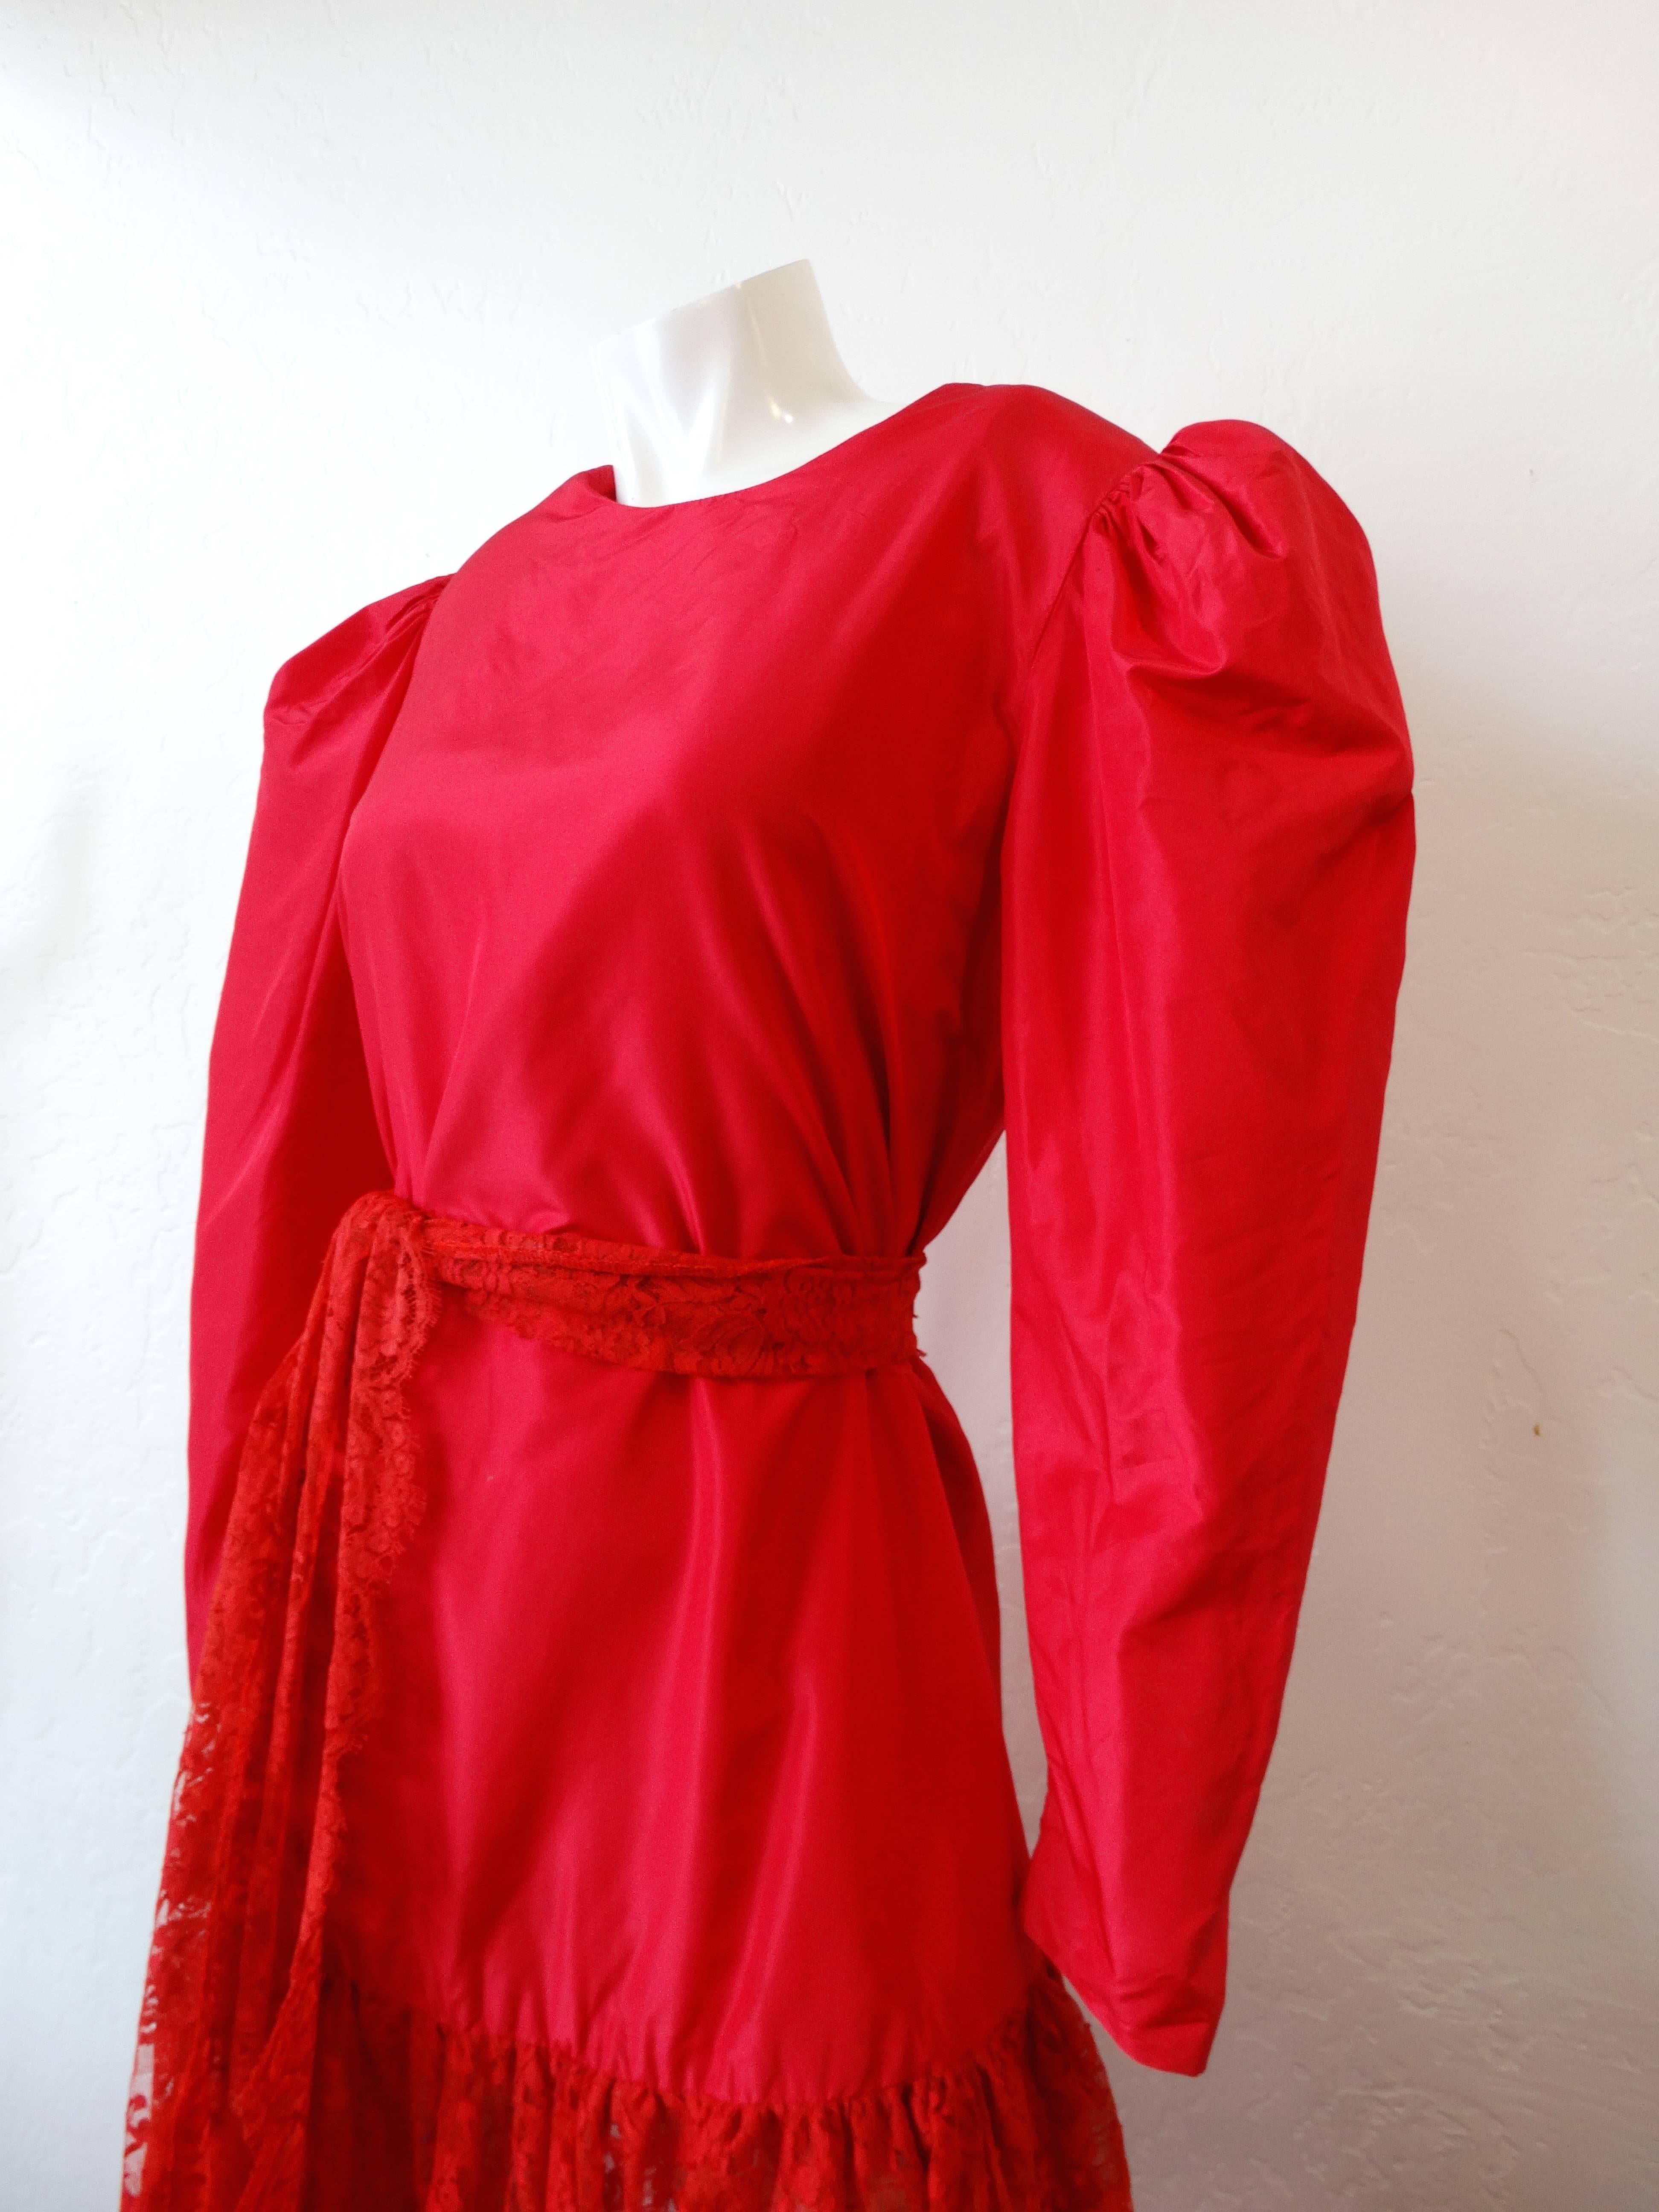 Channel your inner Kate Bush and rock a dramatic red dress! This adorable lace dress is SO-1980s in all the right ways! Bold, sculptural sleeves demand your attention- not to mention the bright cherry red color! Skirt is made of a matching intricate